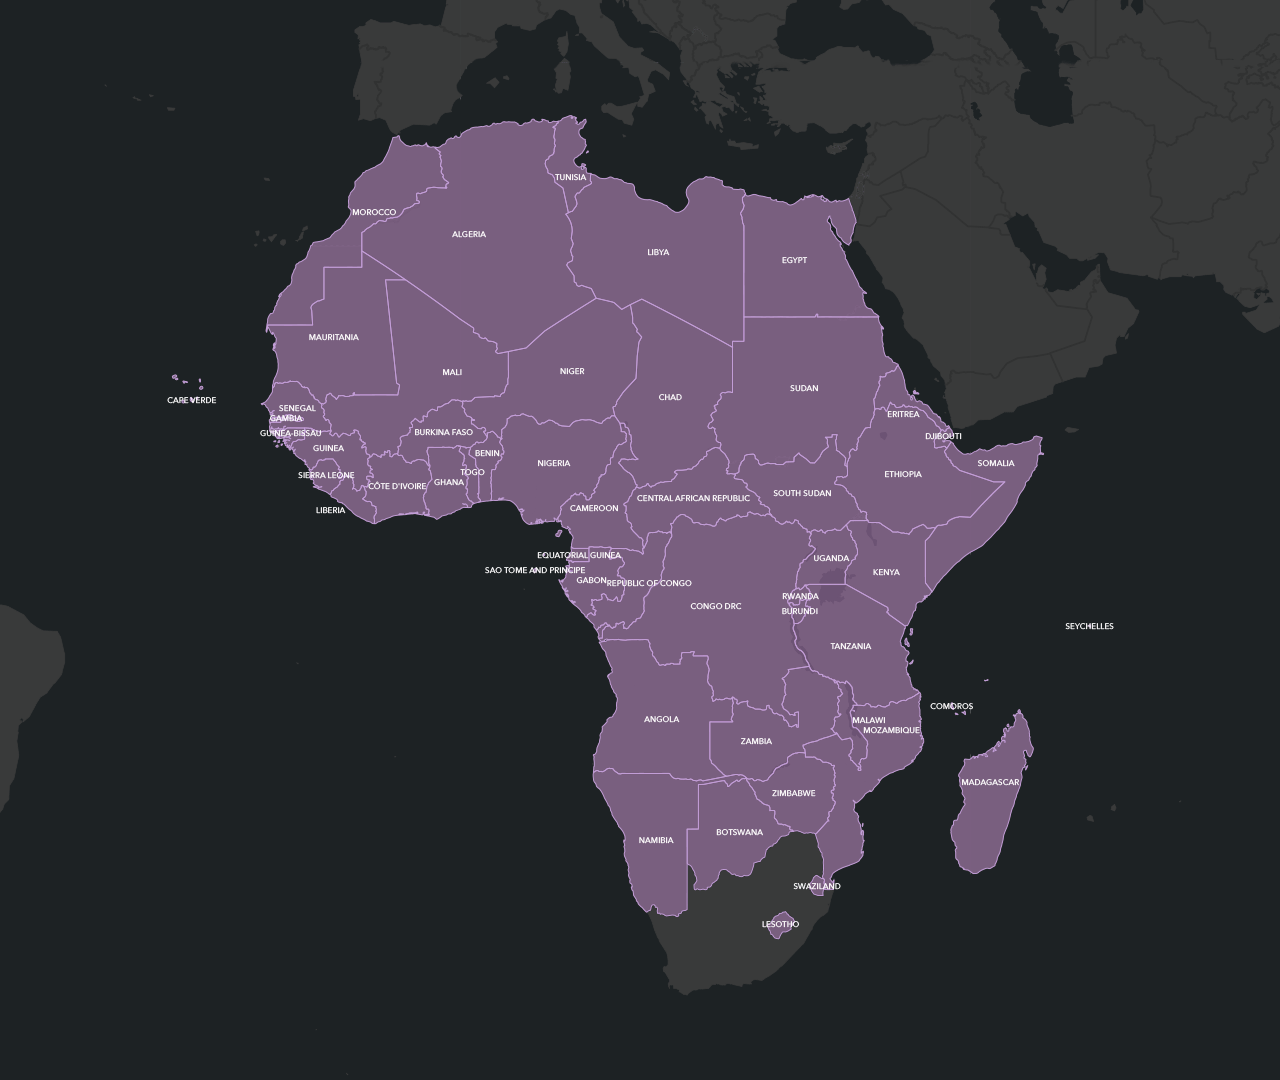 Map of Africa in dull lavender on a dark gray background with countries outlined and labeled in white